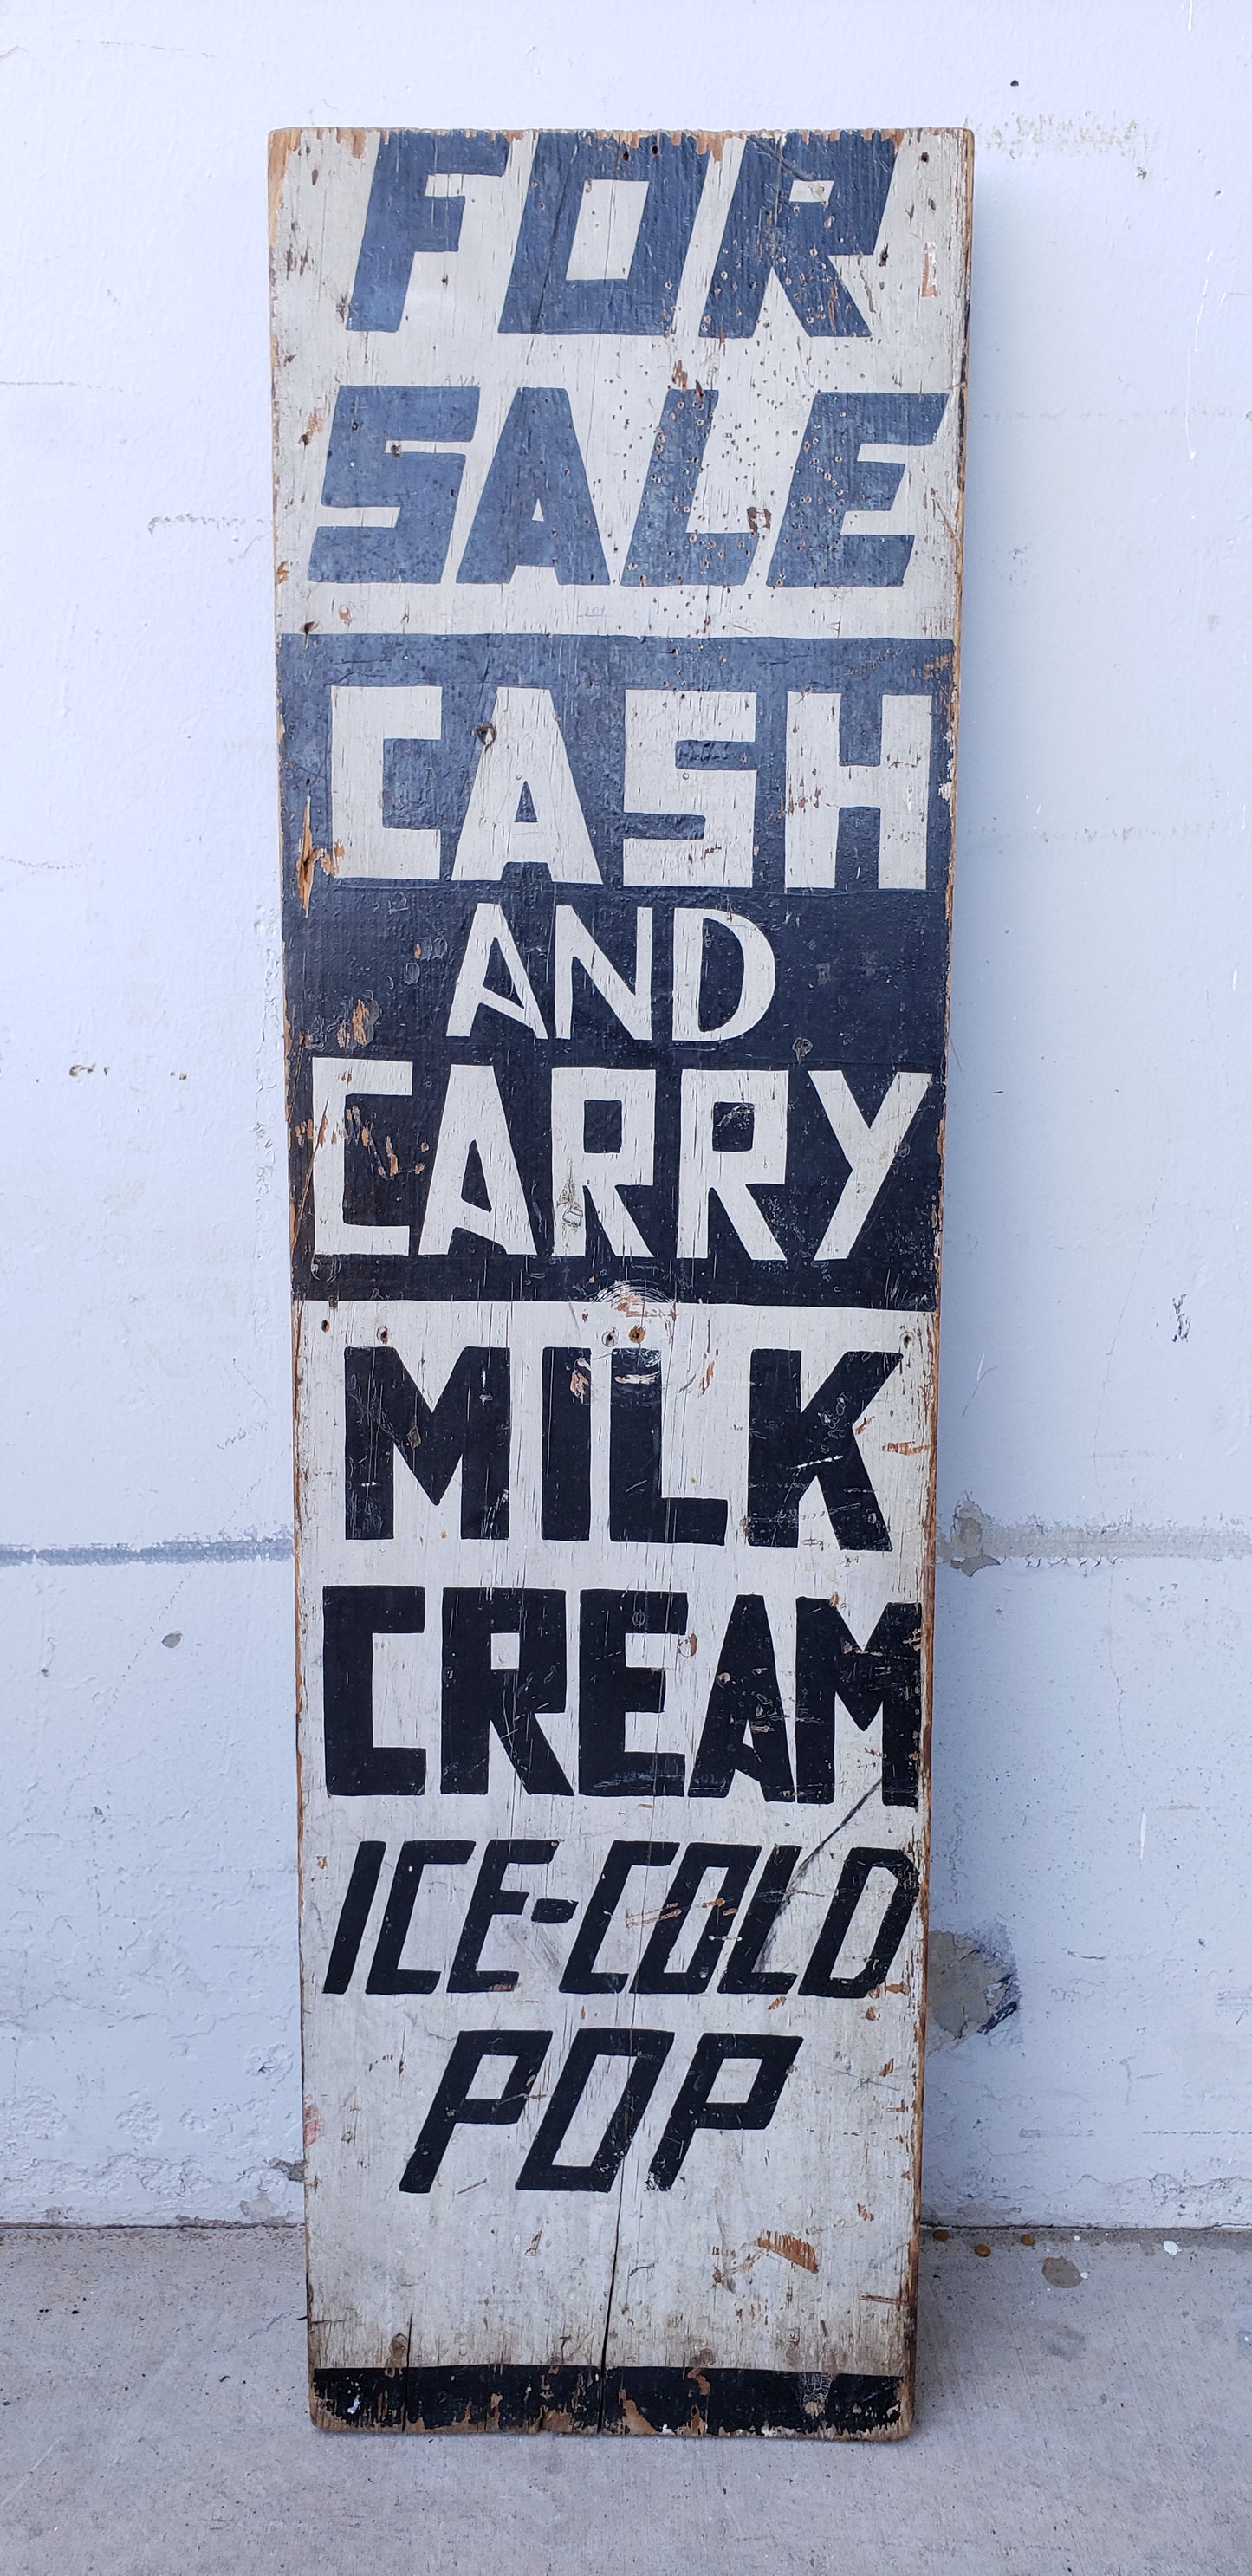 For Sale, Cash and Carry, Milk, Cream Wood Sign